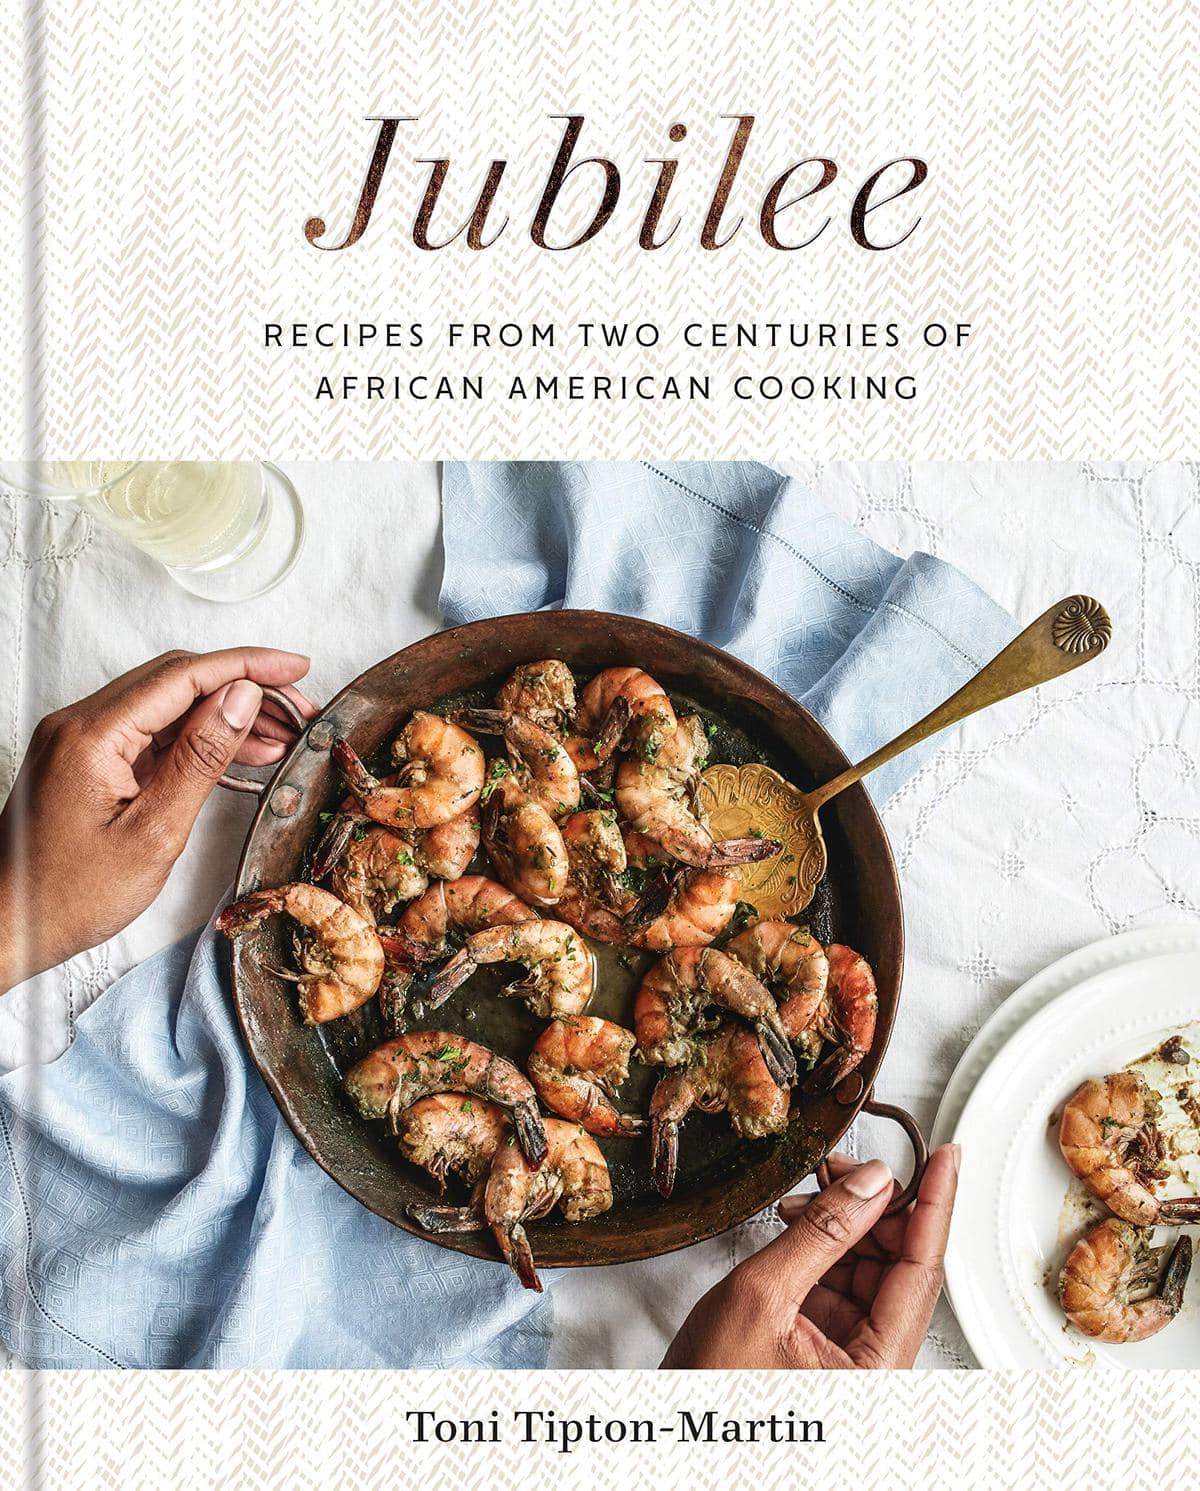 Book \"Jubilee - Recipes from two centuries of African American cooking\"